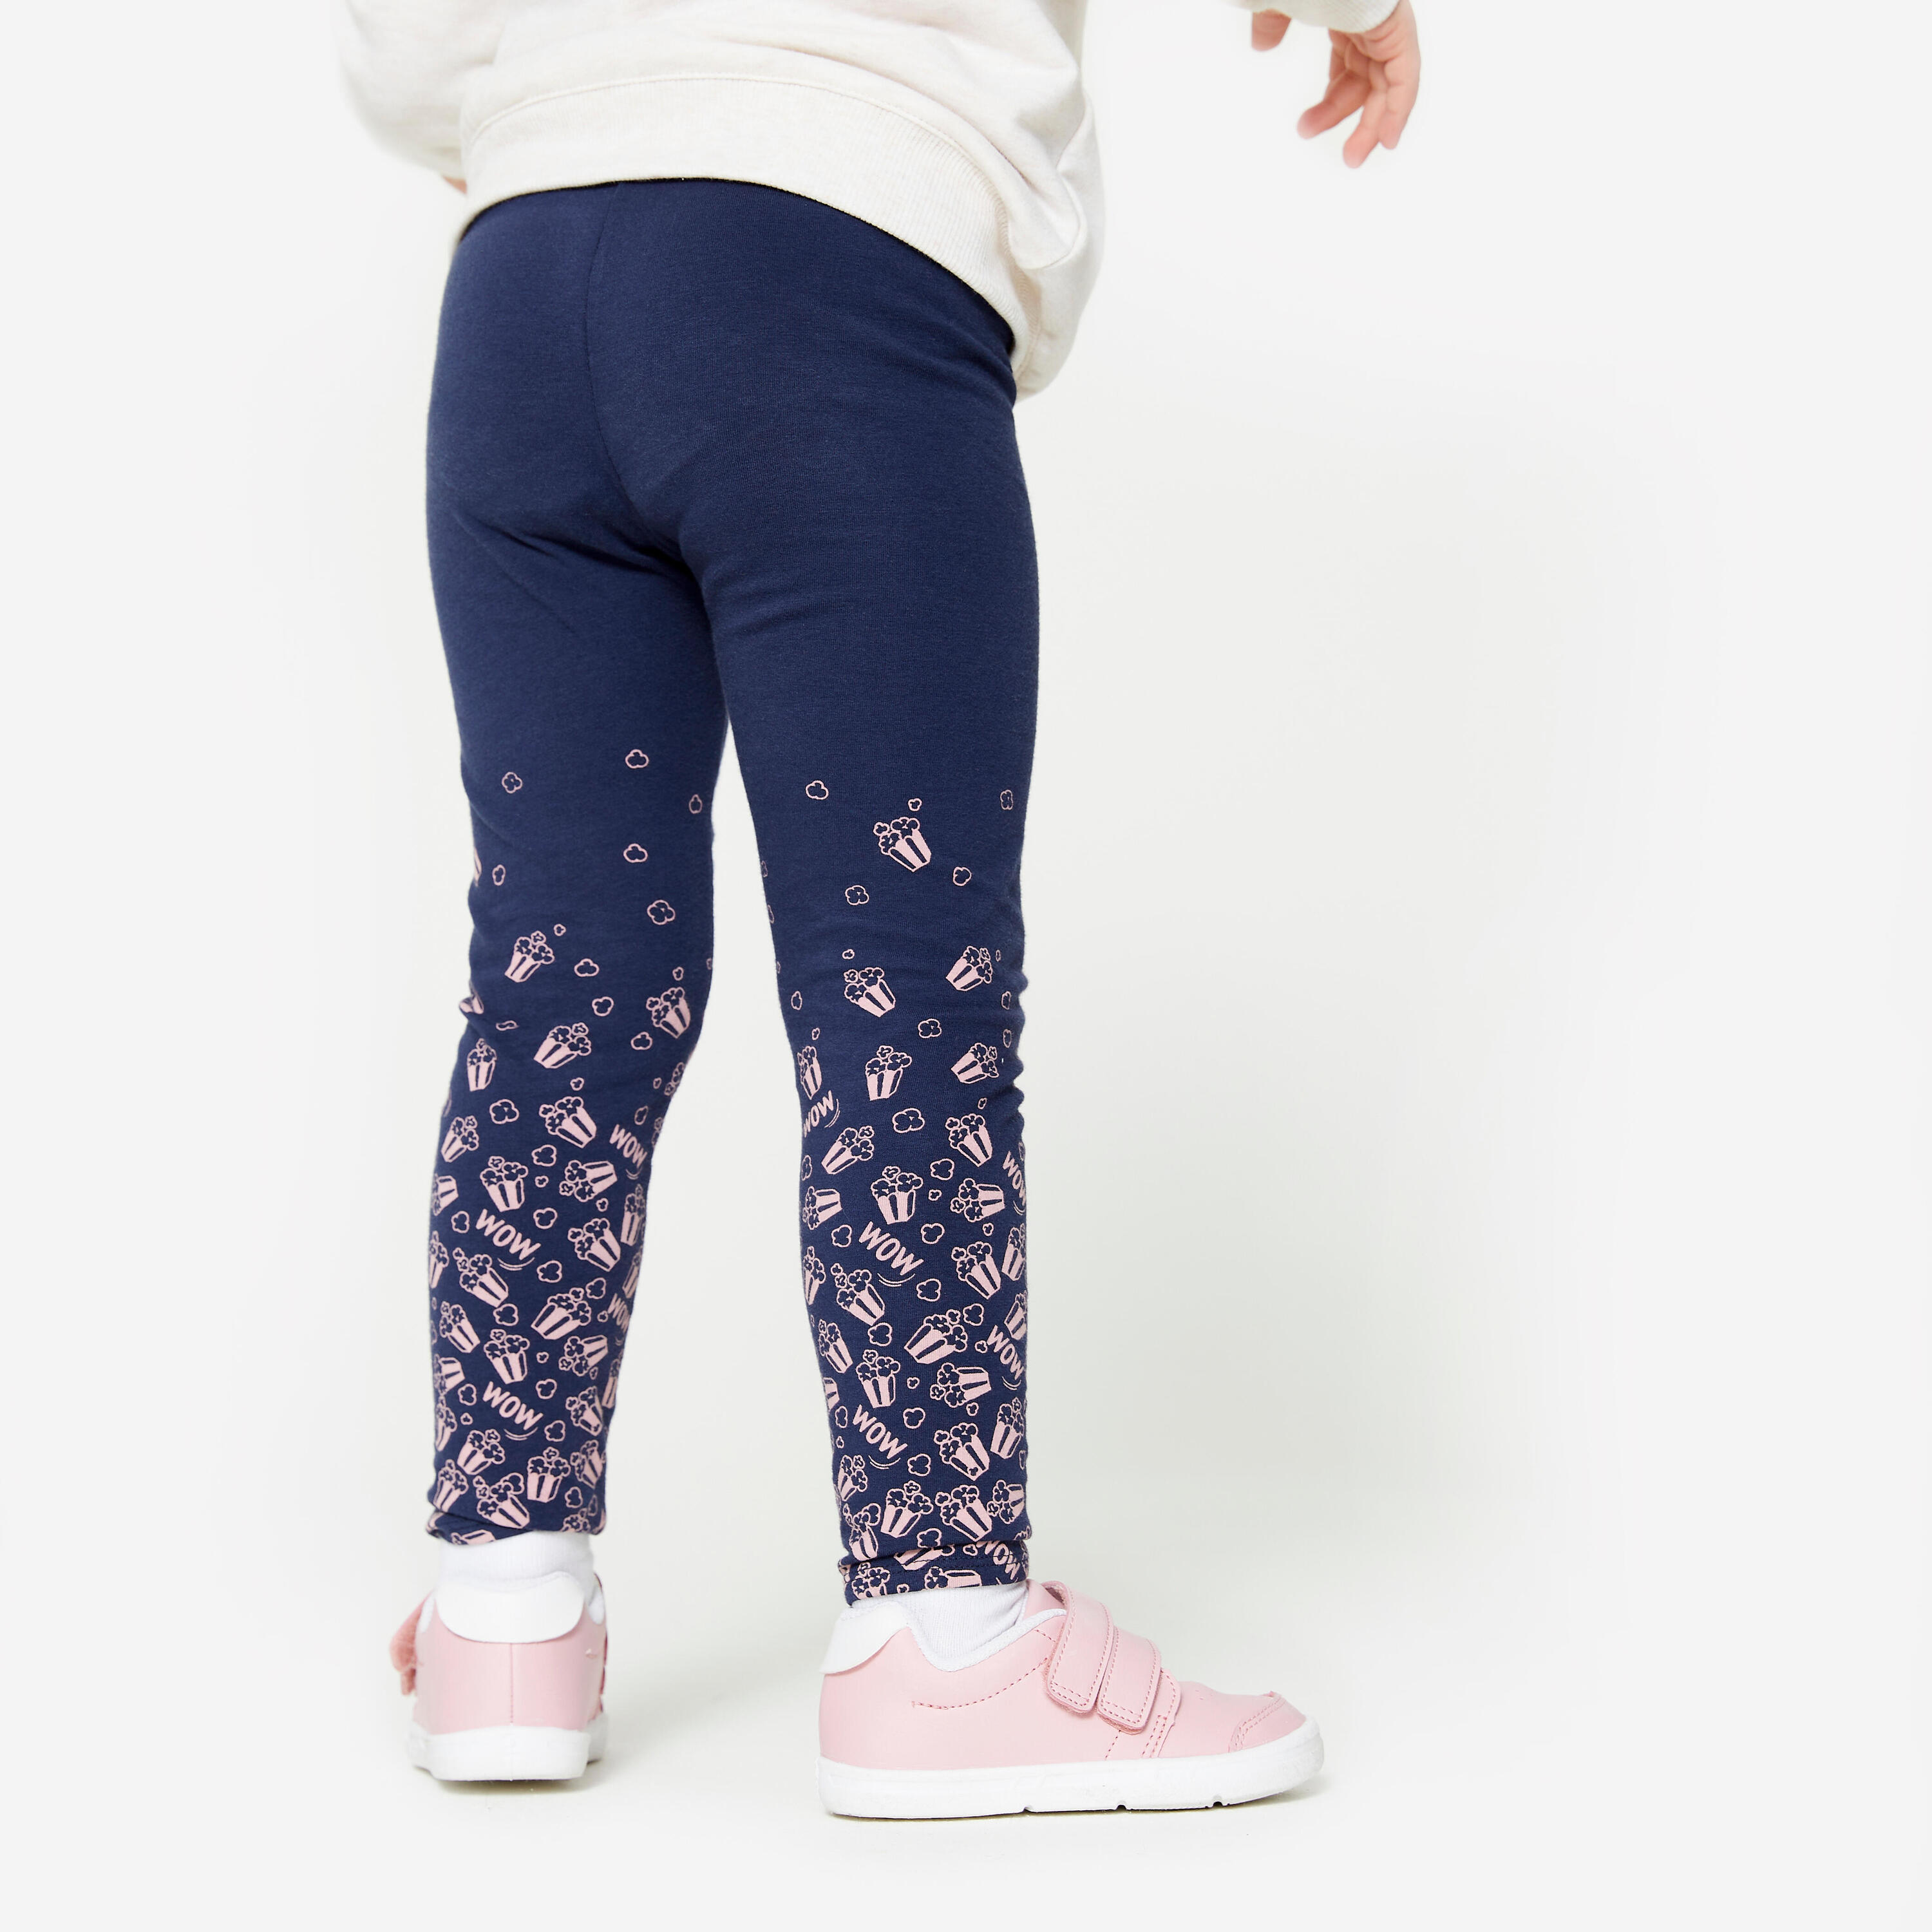 Baby Basic Cotton Leggings - Blue/Pink with Patterns DOMYOS | Decathlon